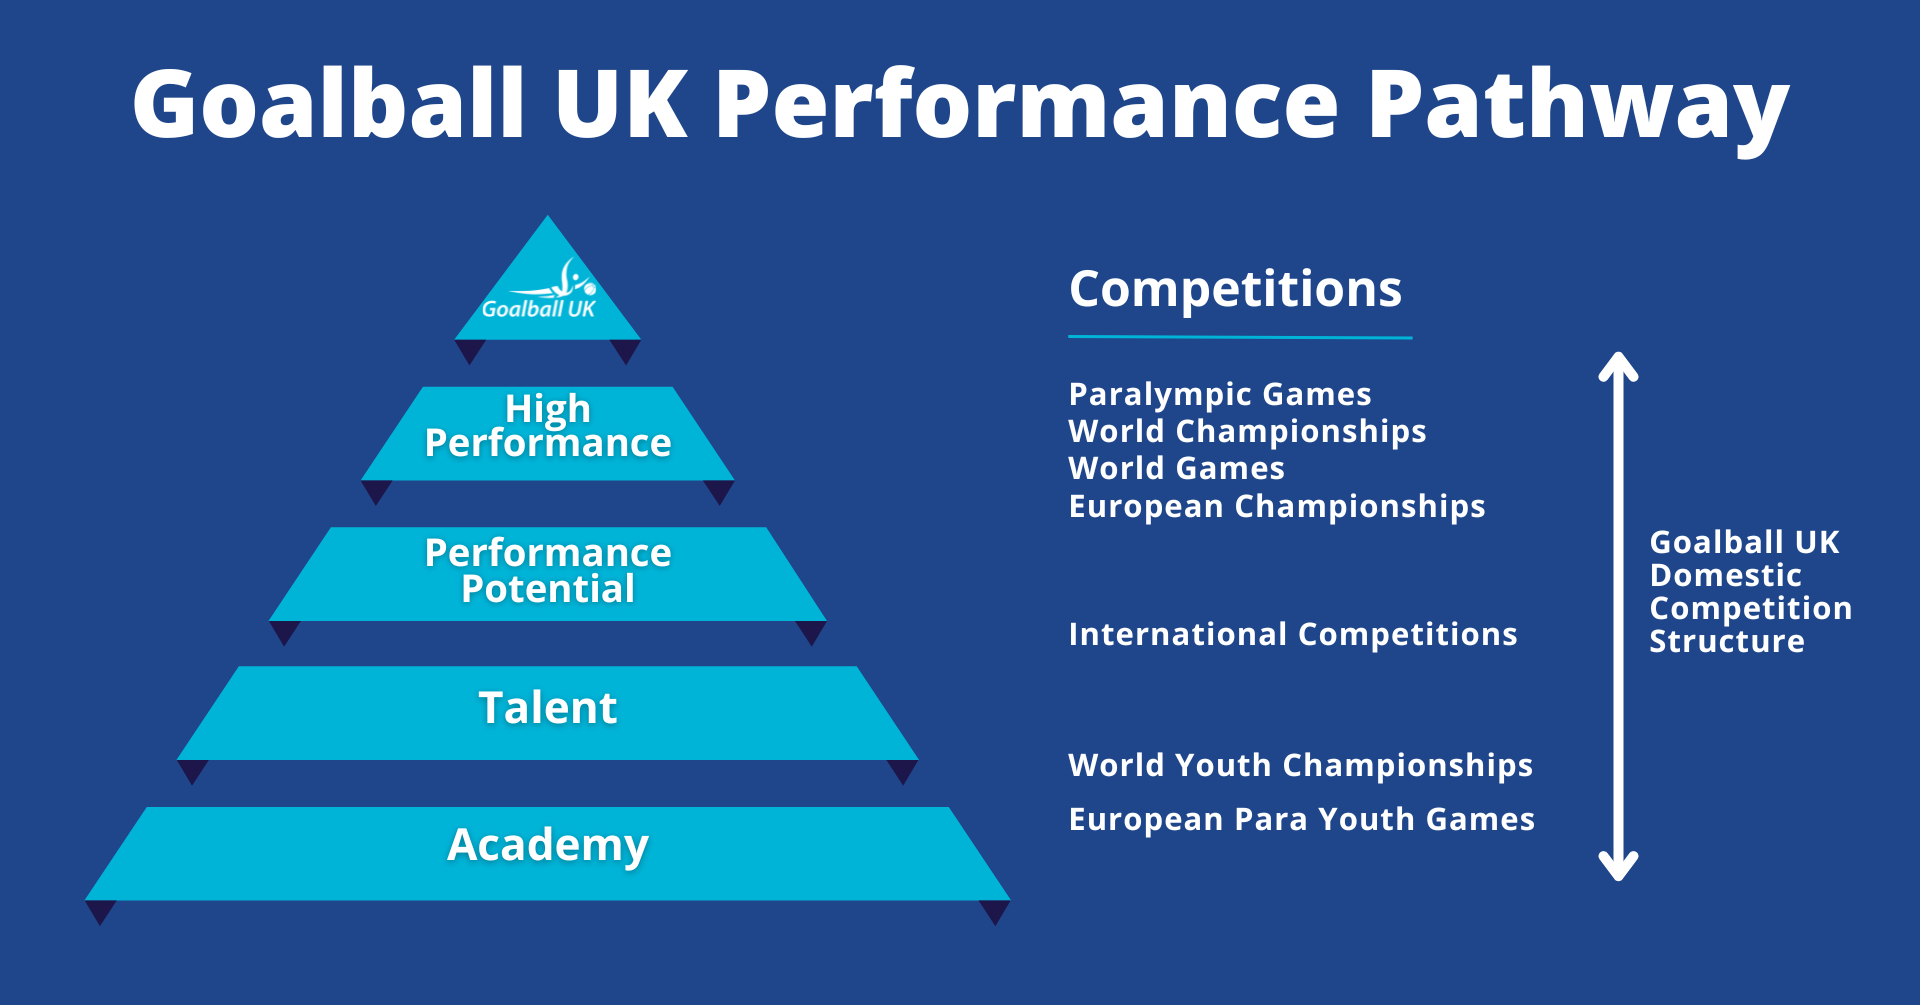 Pyramid with 5 levels. The top is the GUK logo, 2nd is High Performance, 3rd is Performance Potential, 4th is talent, 5th is Academy. On the right in white text details the competitions at each level e.g. High Performance has Paralympics, IBSA World Games and so on